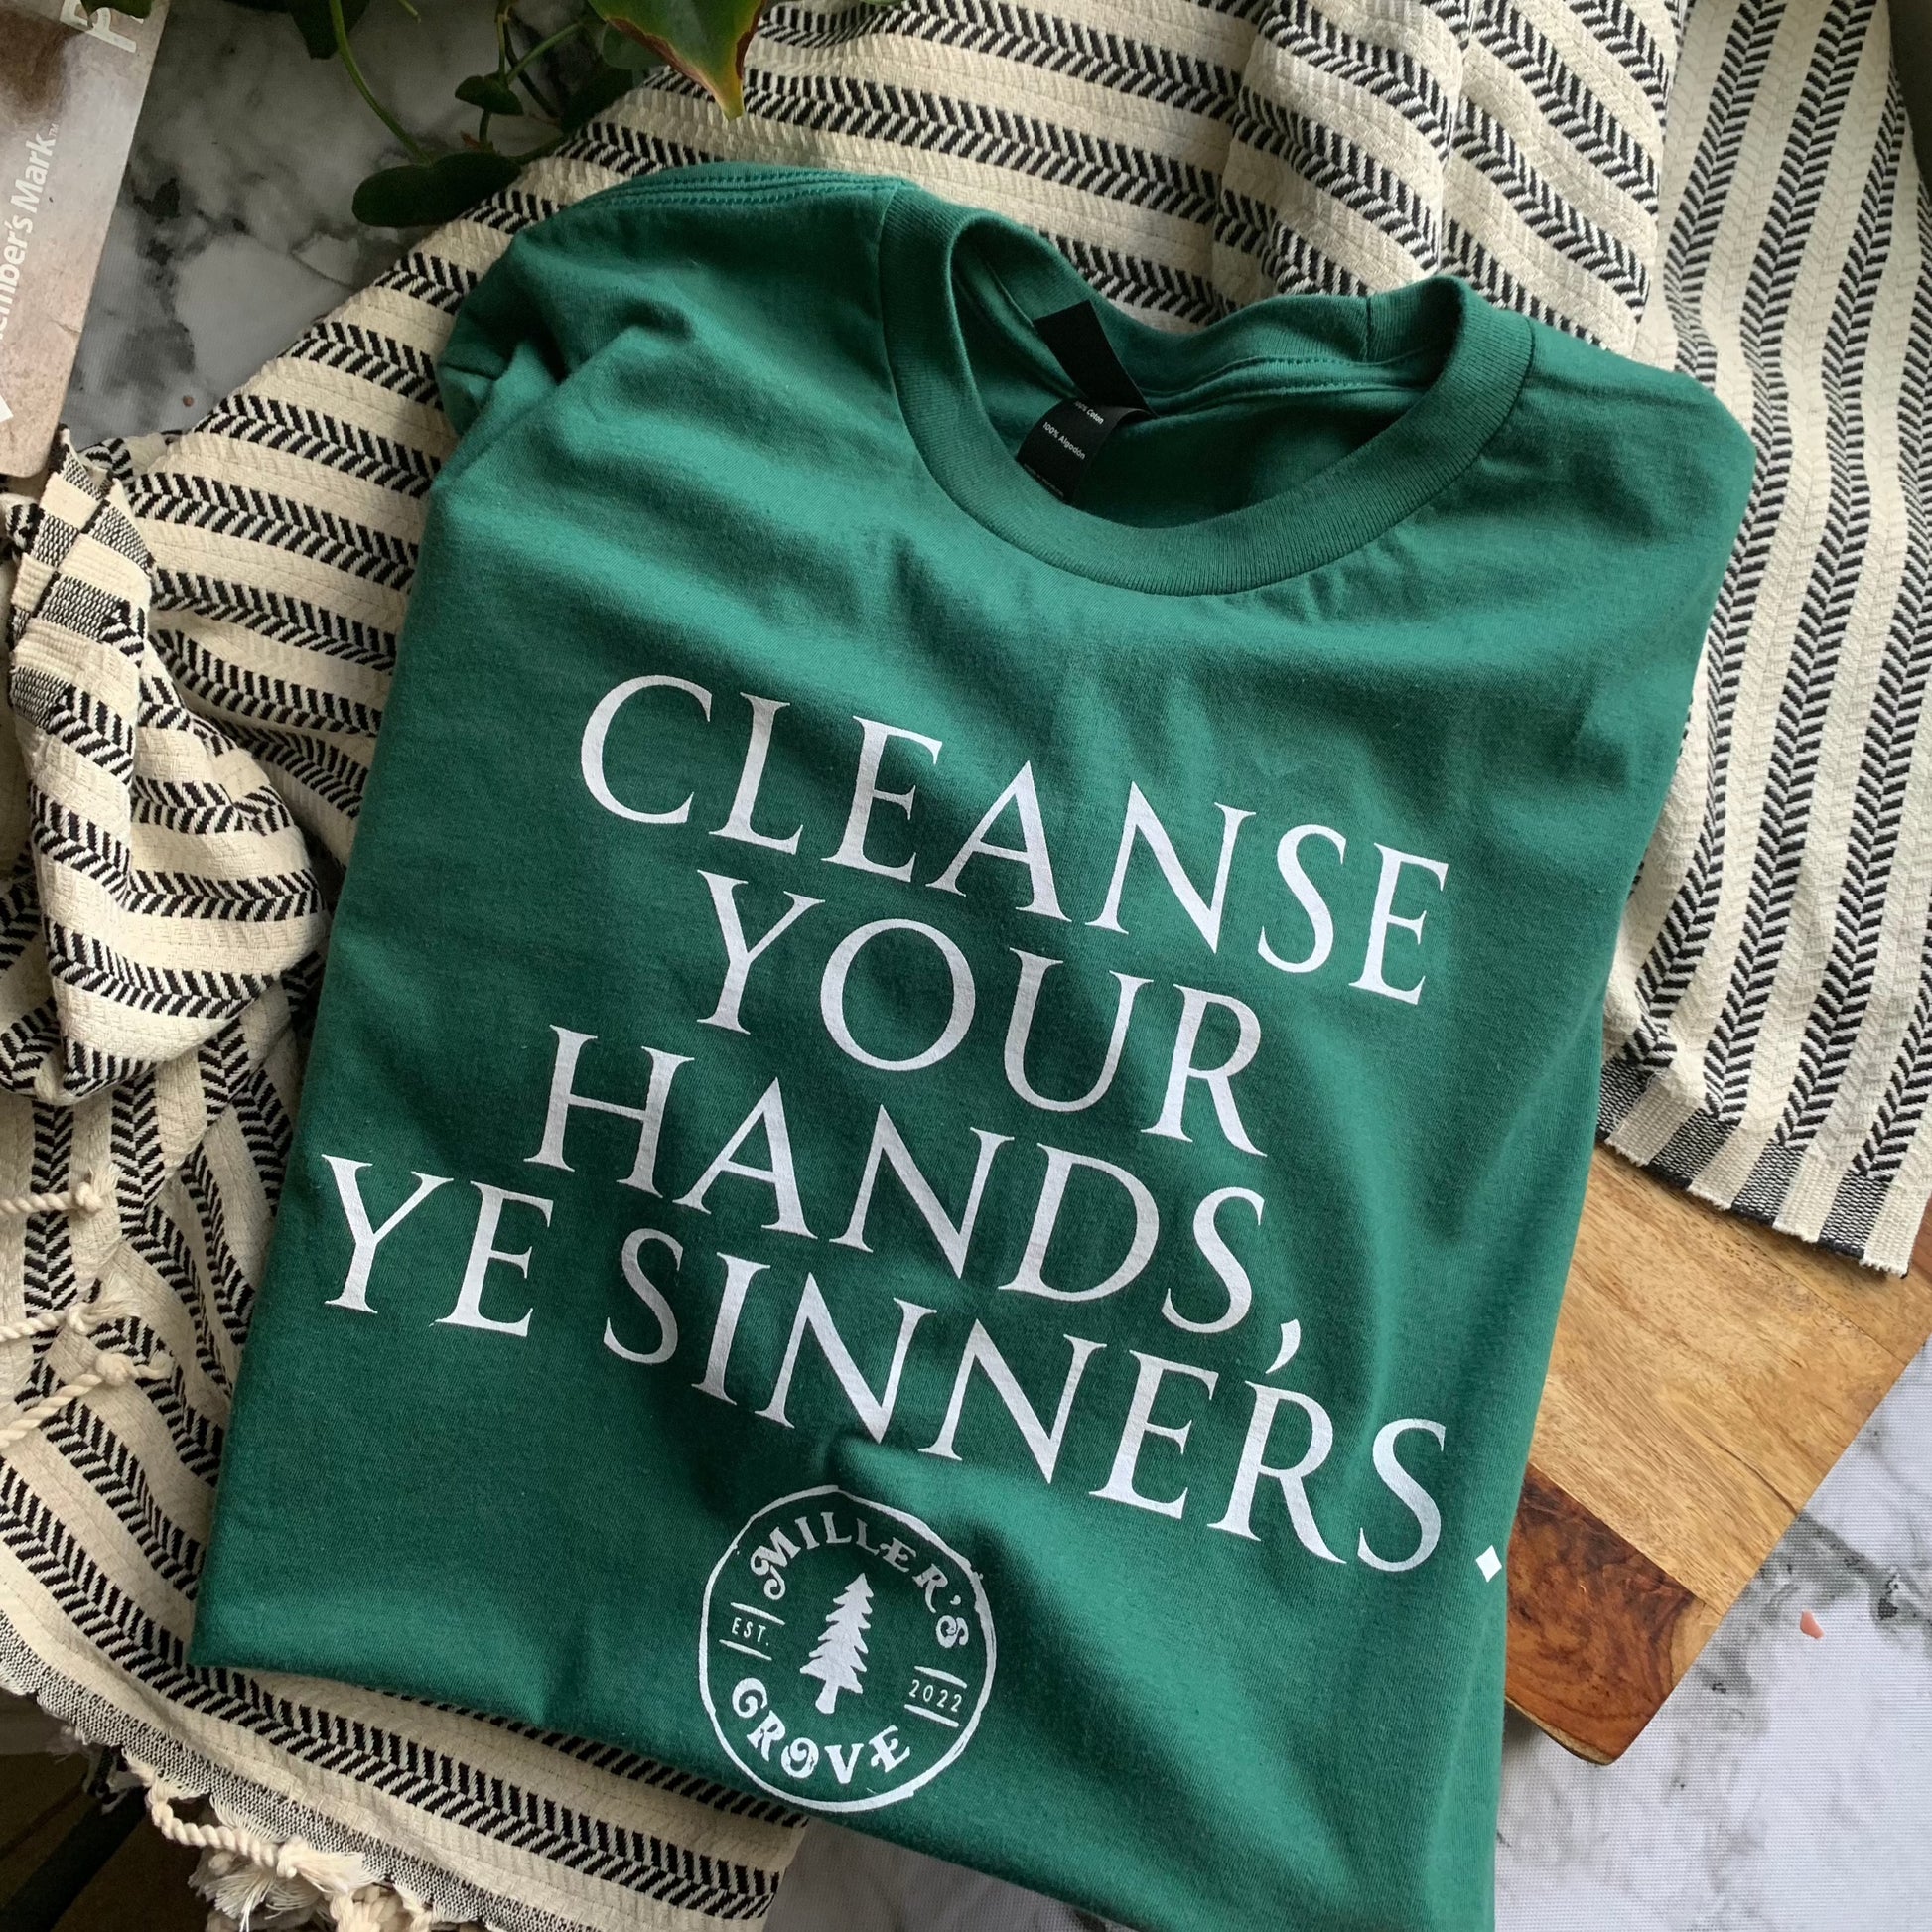 Green short sleeve t shirt that says "cleanse your hands, ye sinners" on the front